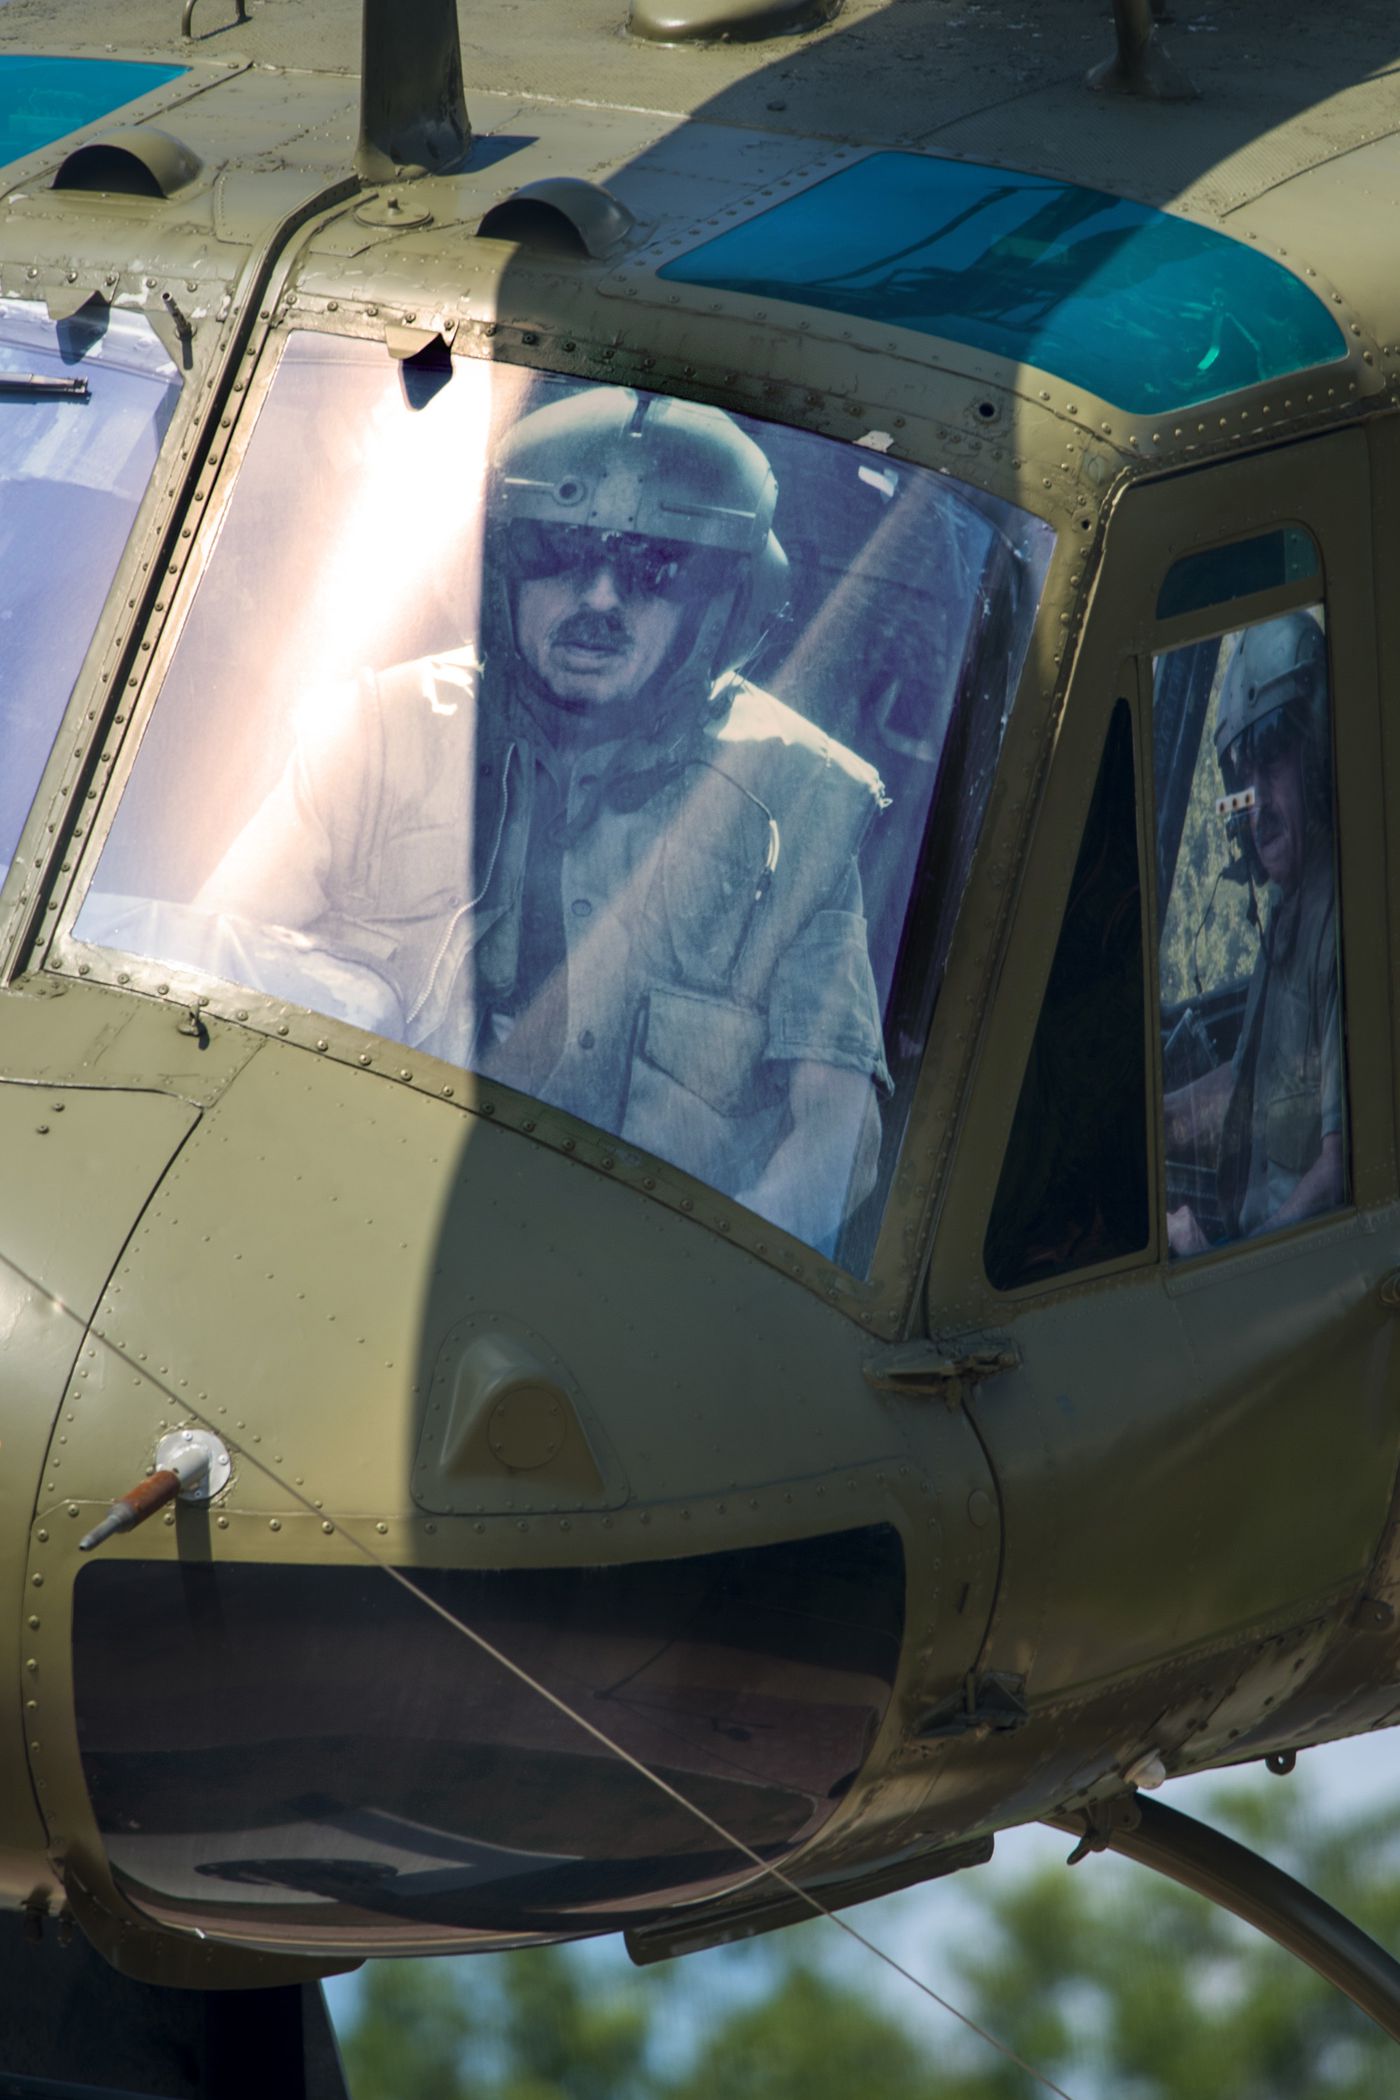 A life-size contemporary photograph of Ralph Storti is in the cockpit of the Huey helicopter. Other community members are pictured in other windows of the chopper.